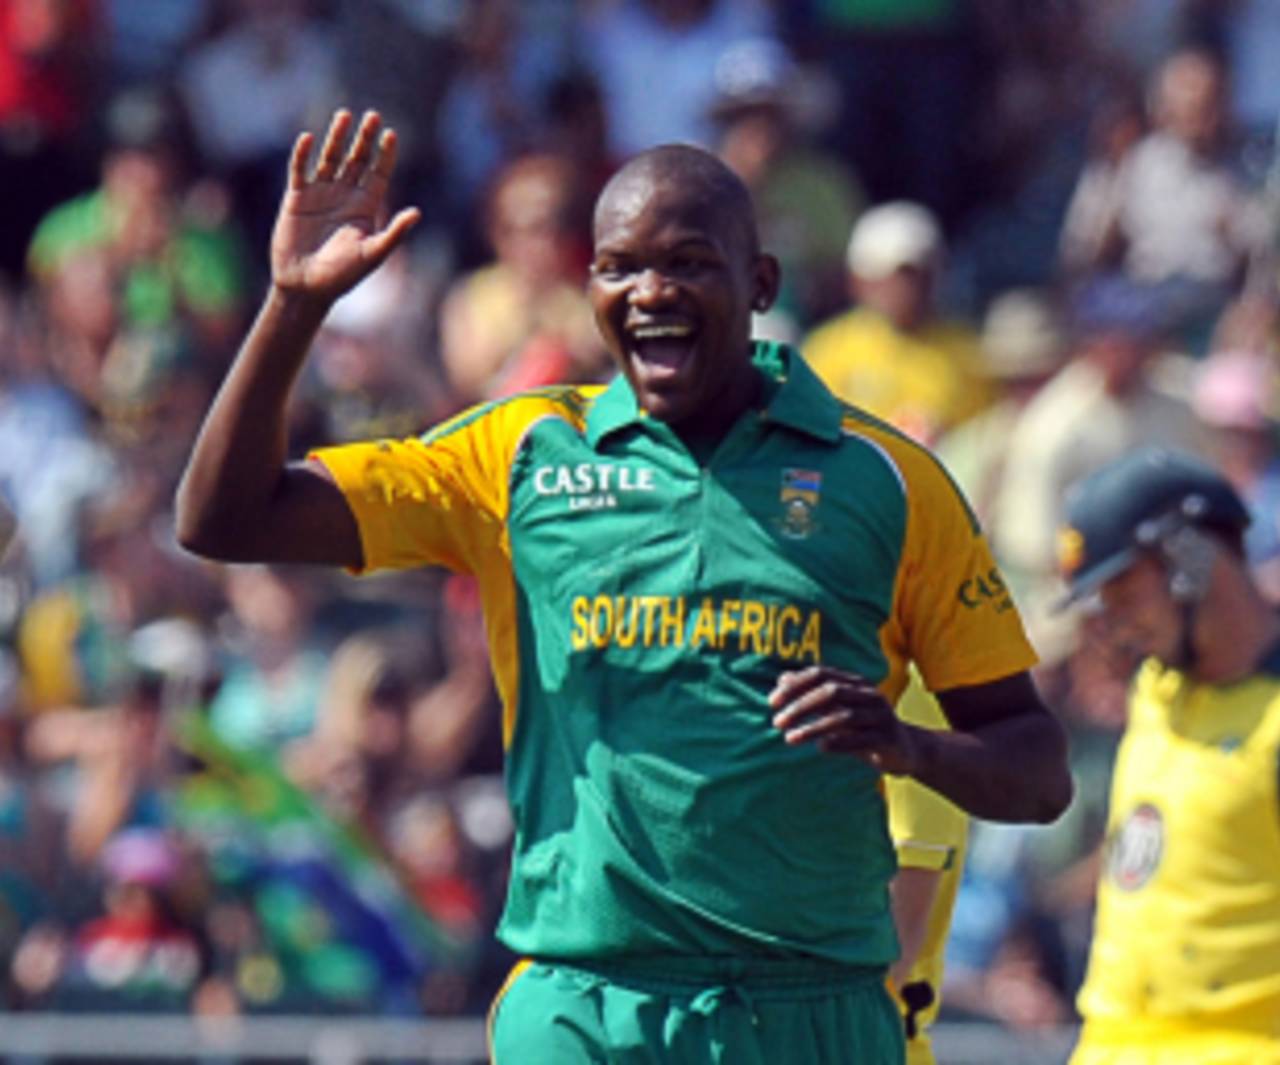 Lonwabo Tsotsobe celebrates a wicket during his spell of 2 for 11, South Africa v Australia, 2nd Twenty20, Johannesburg, October 16 2011